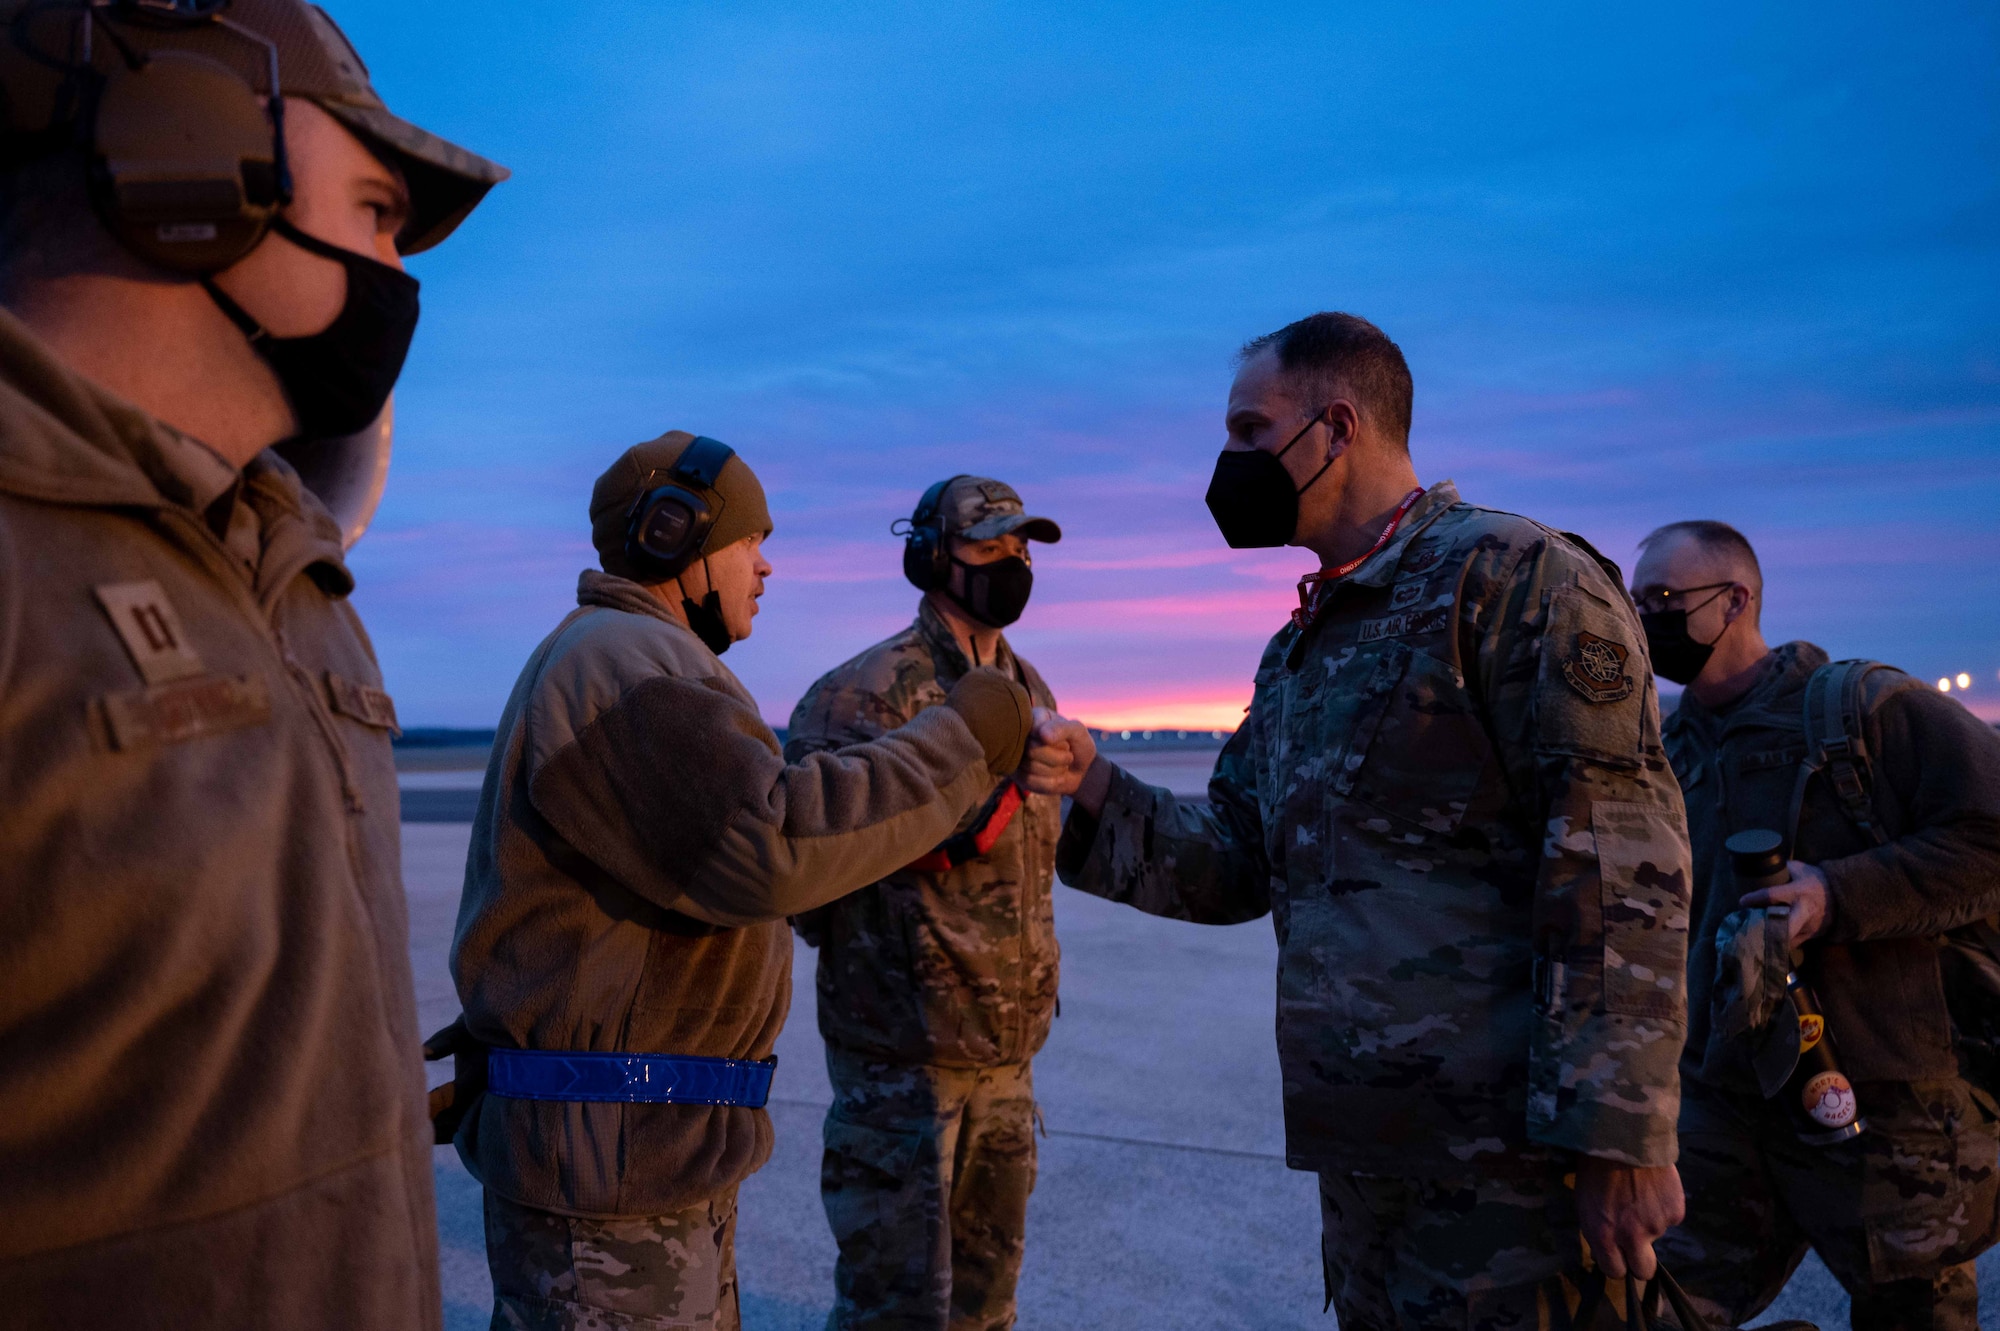 Col. Matt Husemann (center right), 436th Airlift Wing commander, greets Airmen from the 736th Aircraft Maintenance Squadron before a flight to Westover Air Reserve Base, Massachusetts, at Dover Air Force Base, Delaware, Jan. 25, 2022. During the visit, Husemann and Chief Master Sgt. Tim Bayes, 436th AW command chief, toured the C-5 Isochronal Maintenance Dock and gave an all call to members of the 436th Maintenance Squadron, Operating Location Alpha, a tenant unit of the 436th AW. (U.S. Air Force photo by Senior Airman Faith Schaefer)